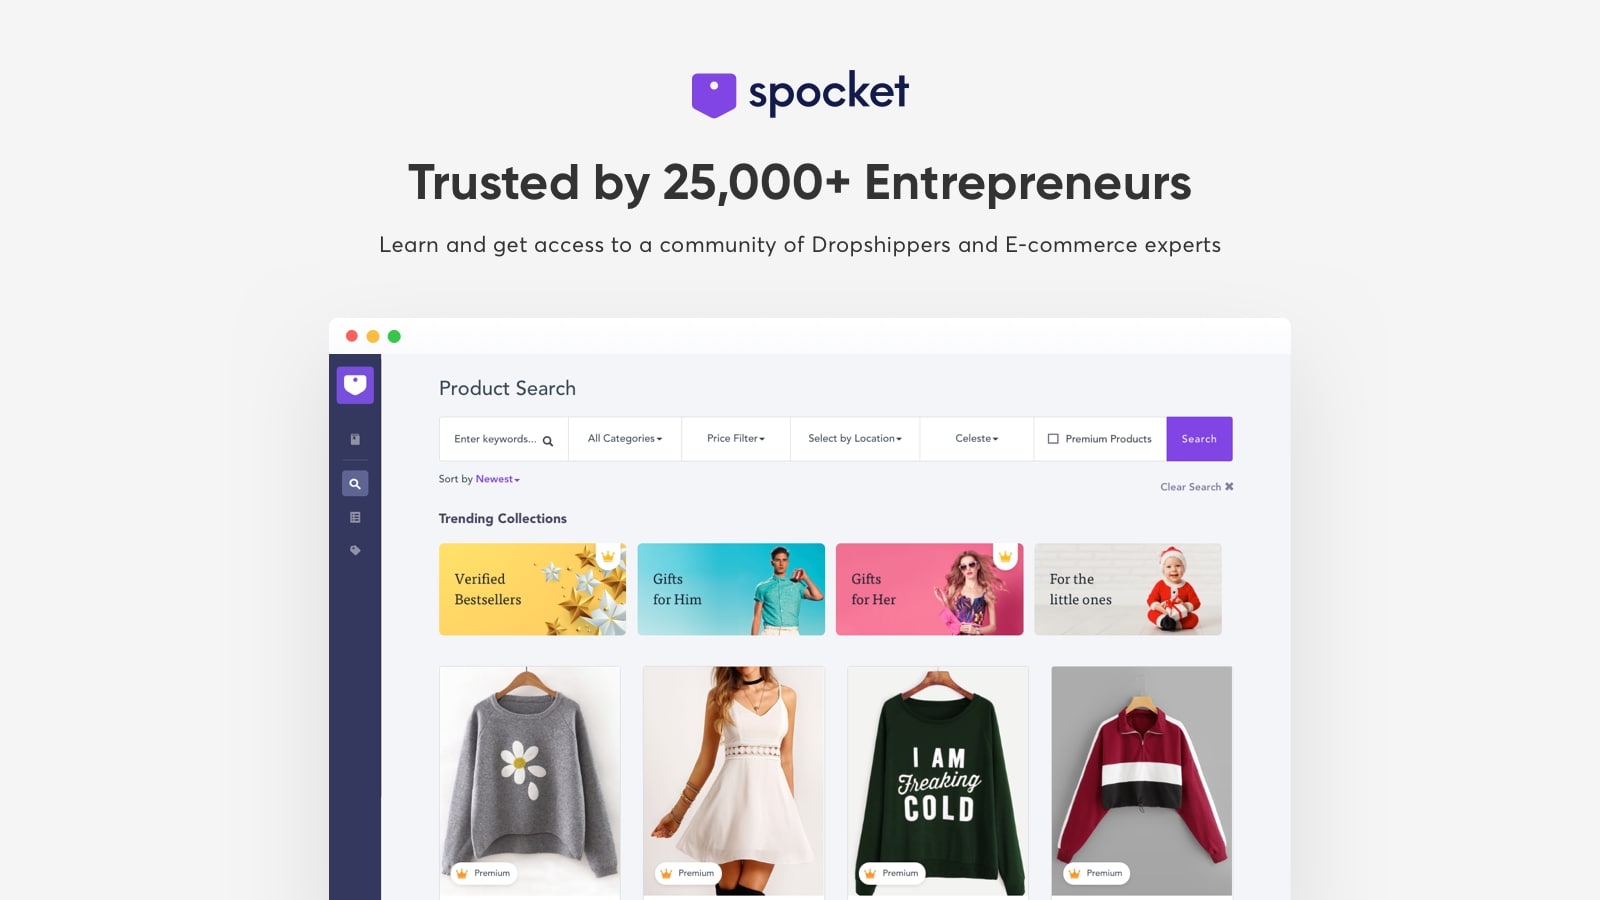 4. Spocket offers high quality products.jpg